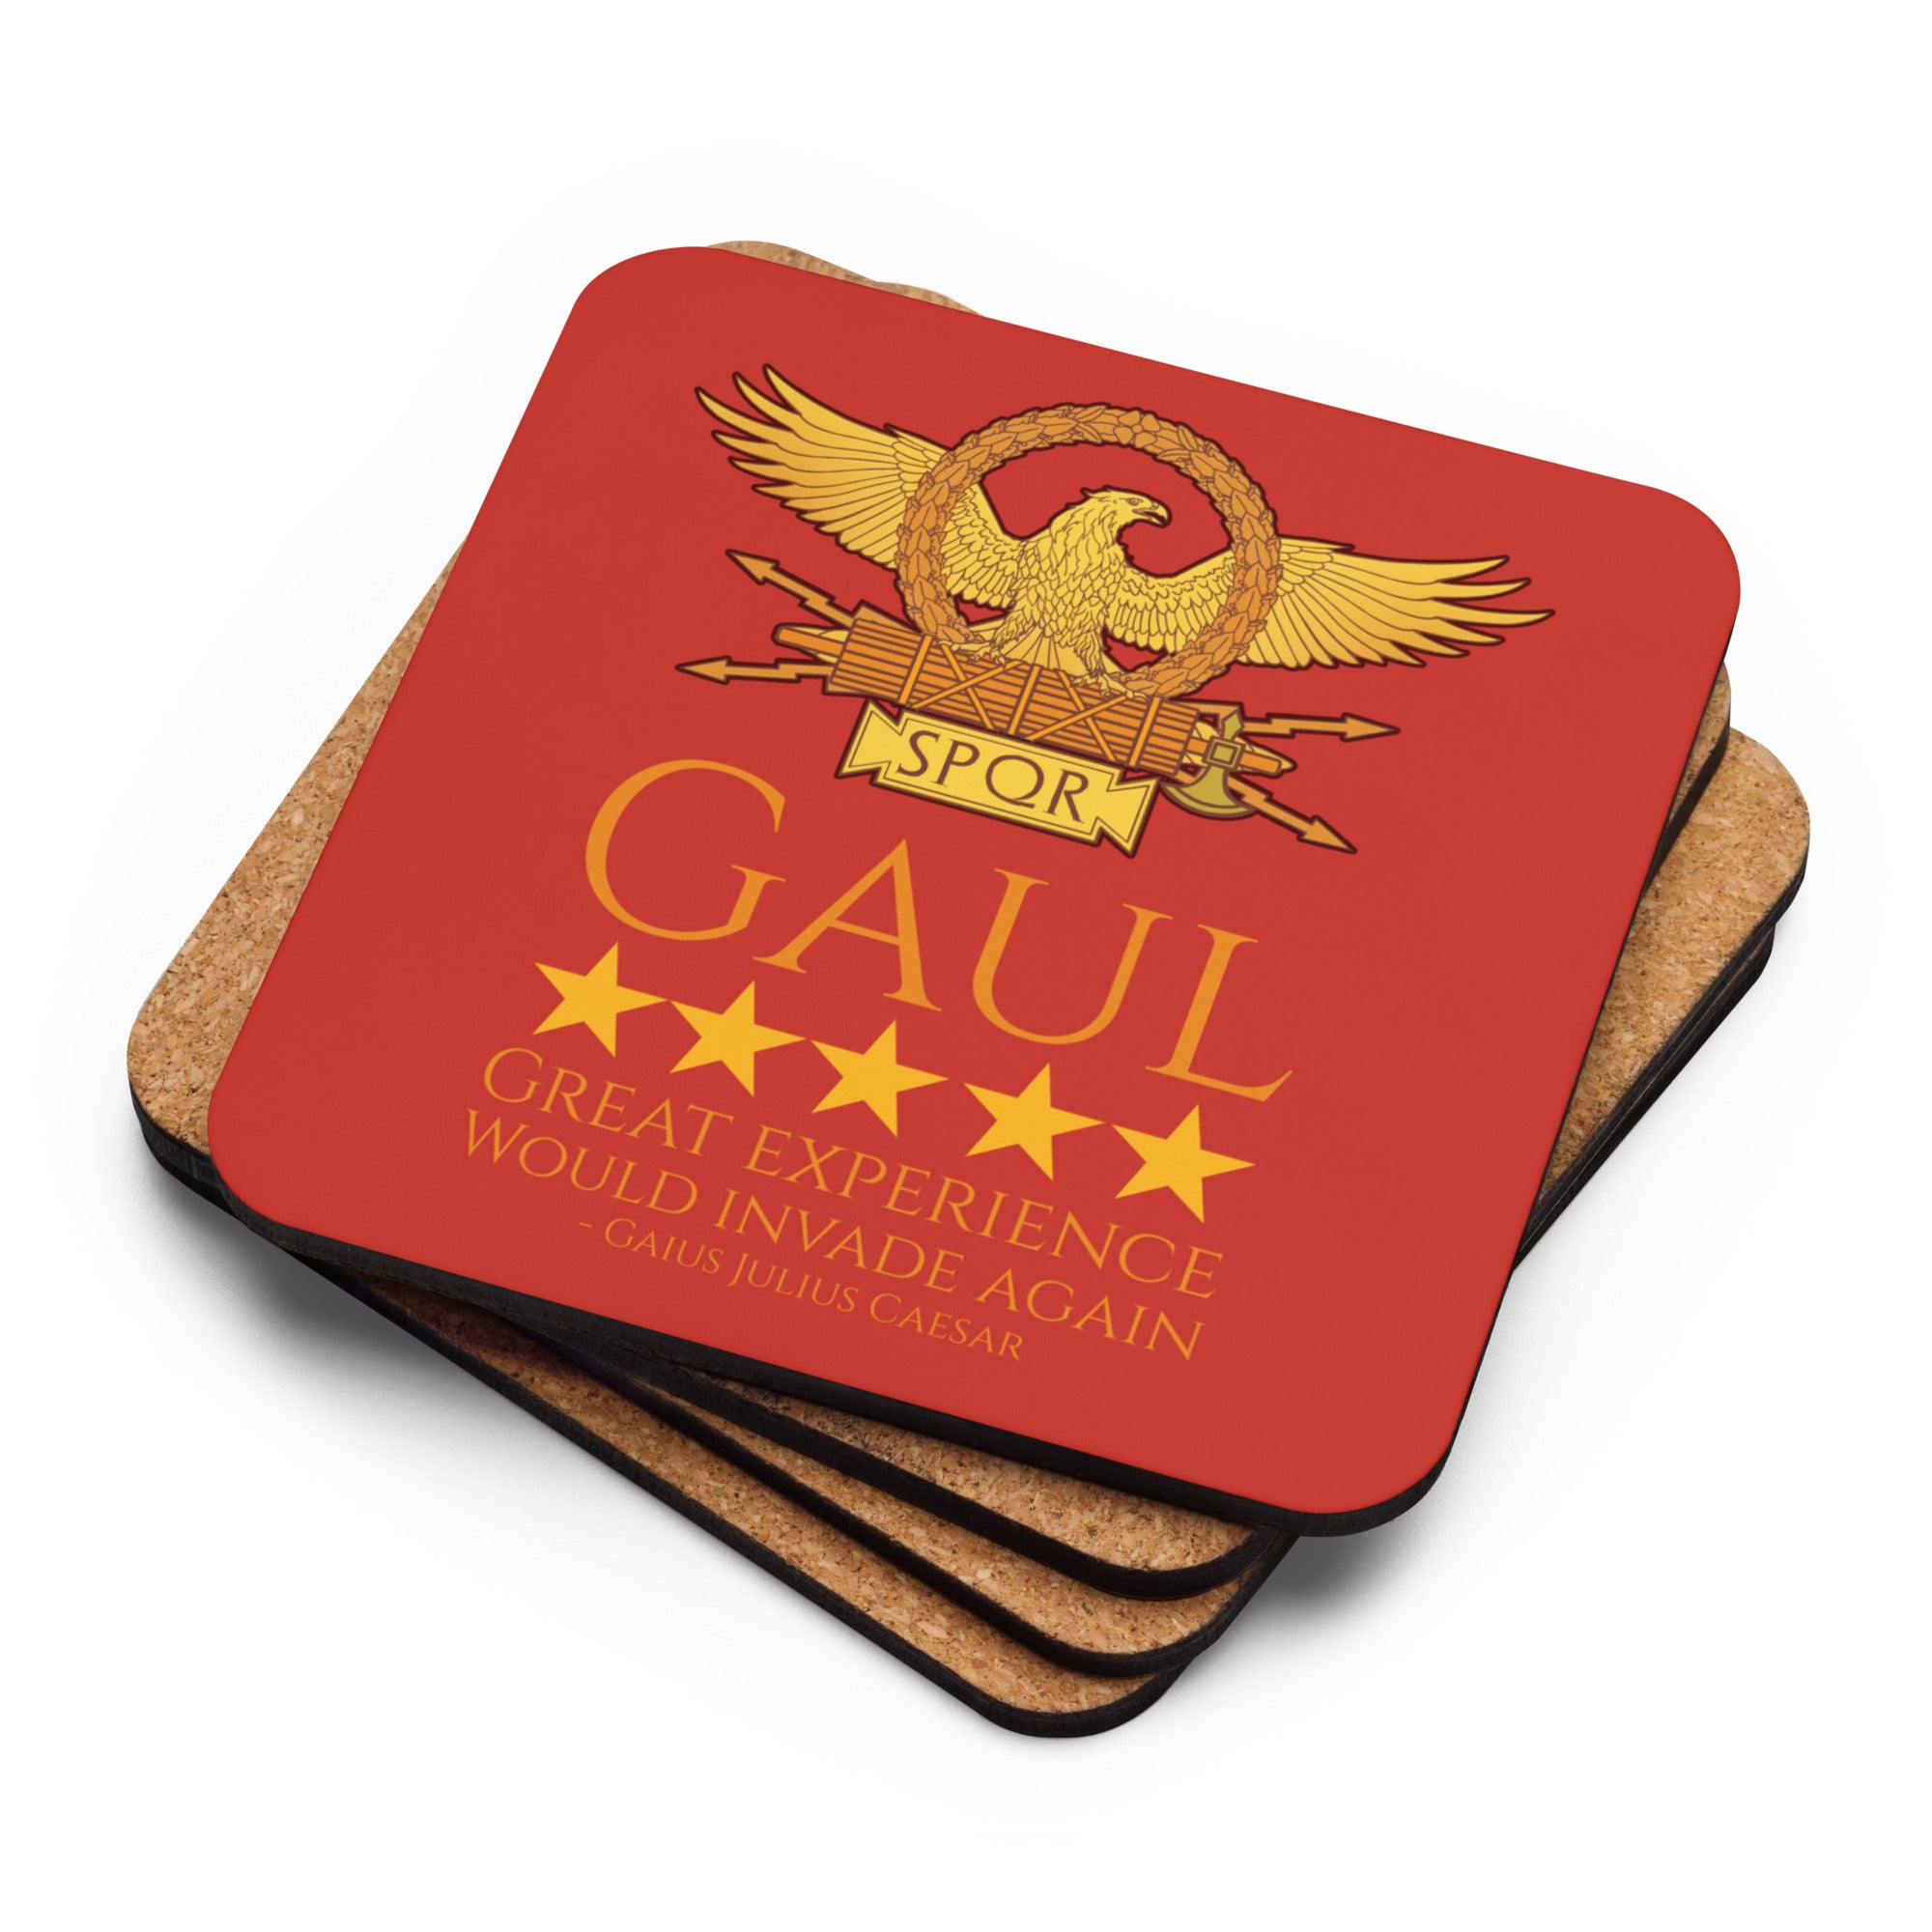 Gaul - Great Experience, Would Invade Again - Julius Caesar Cork-Back Coaster (Red)